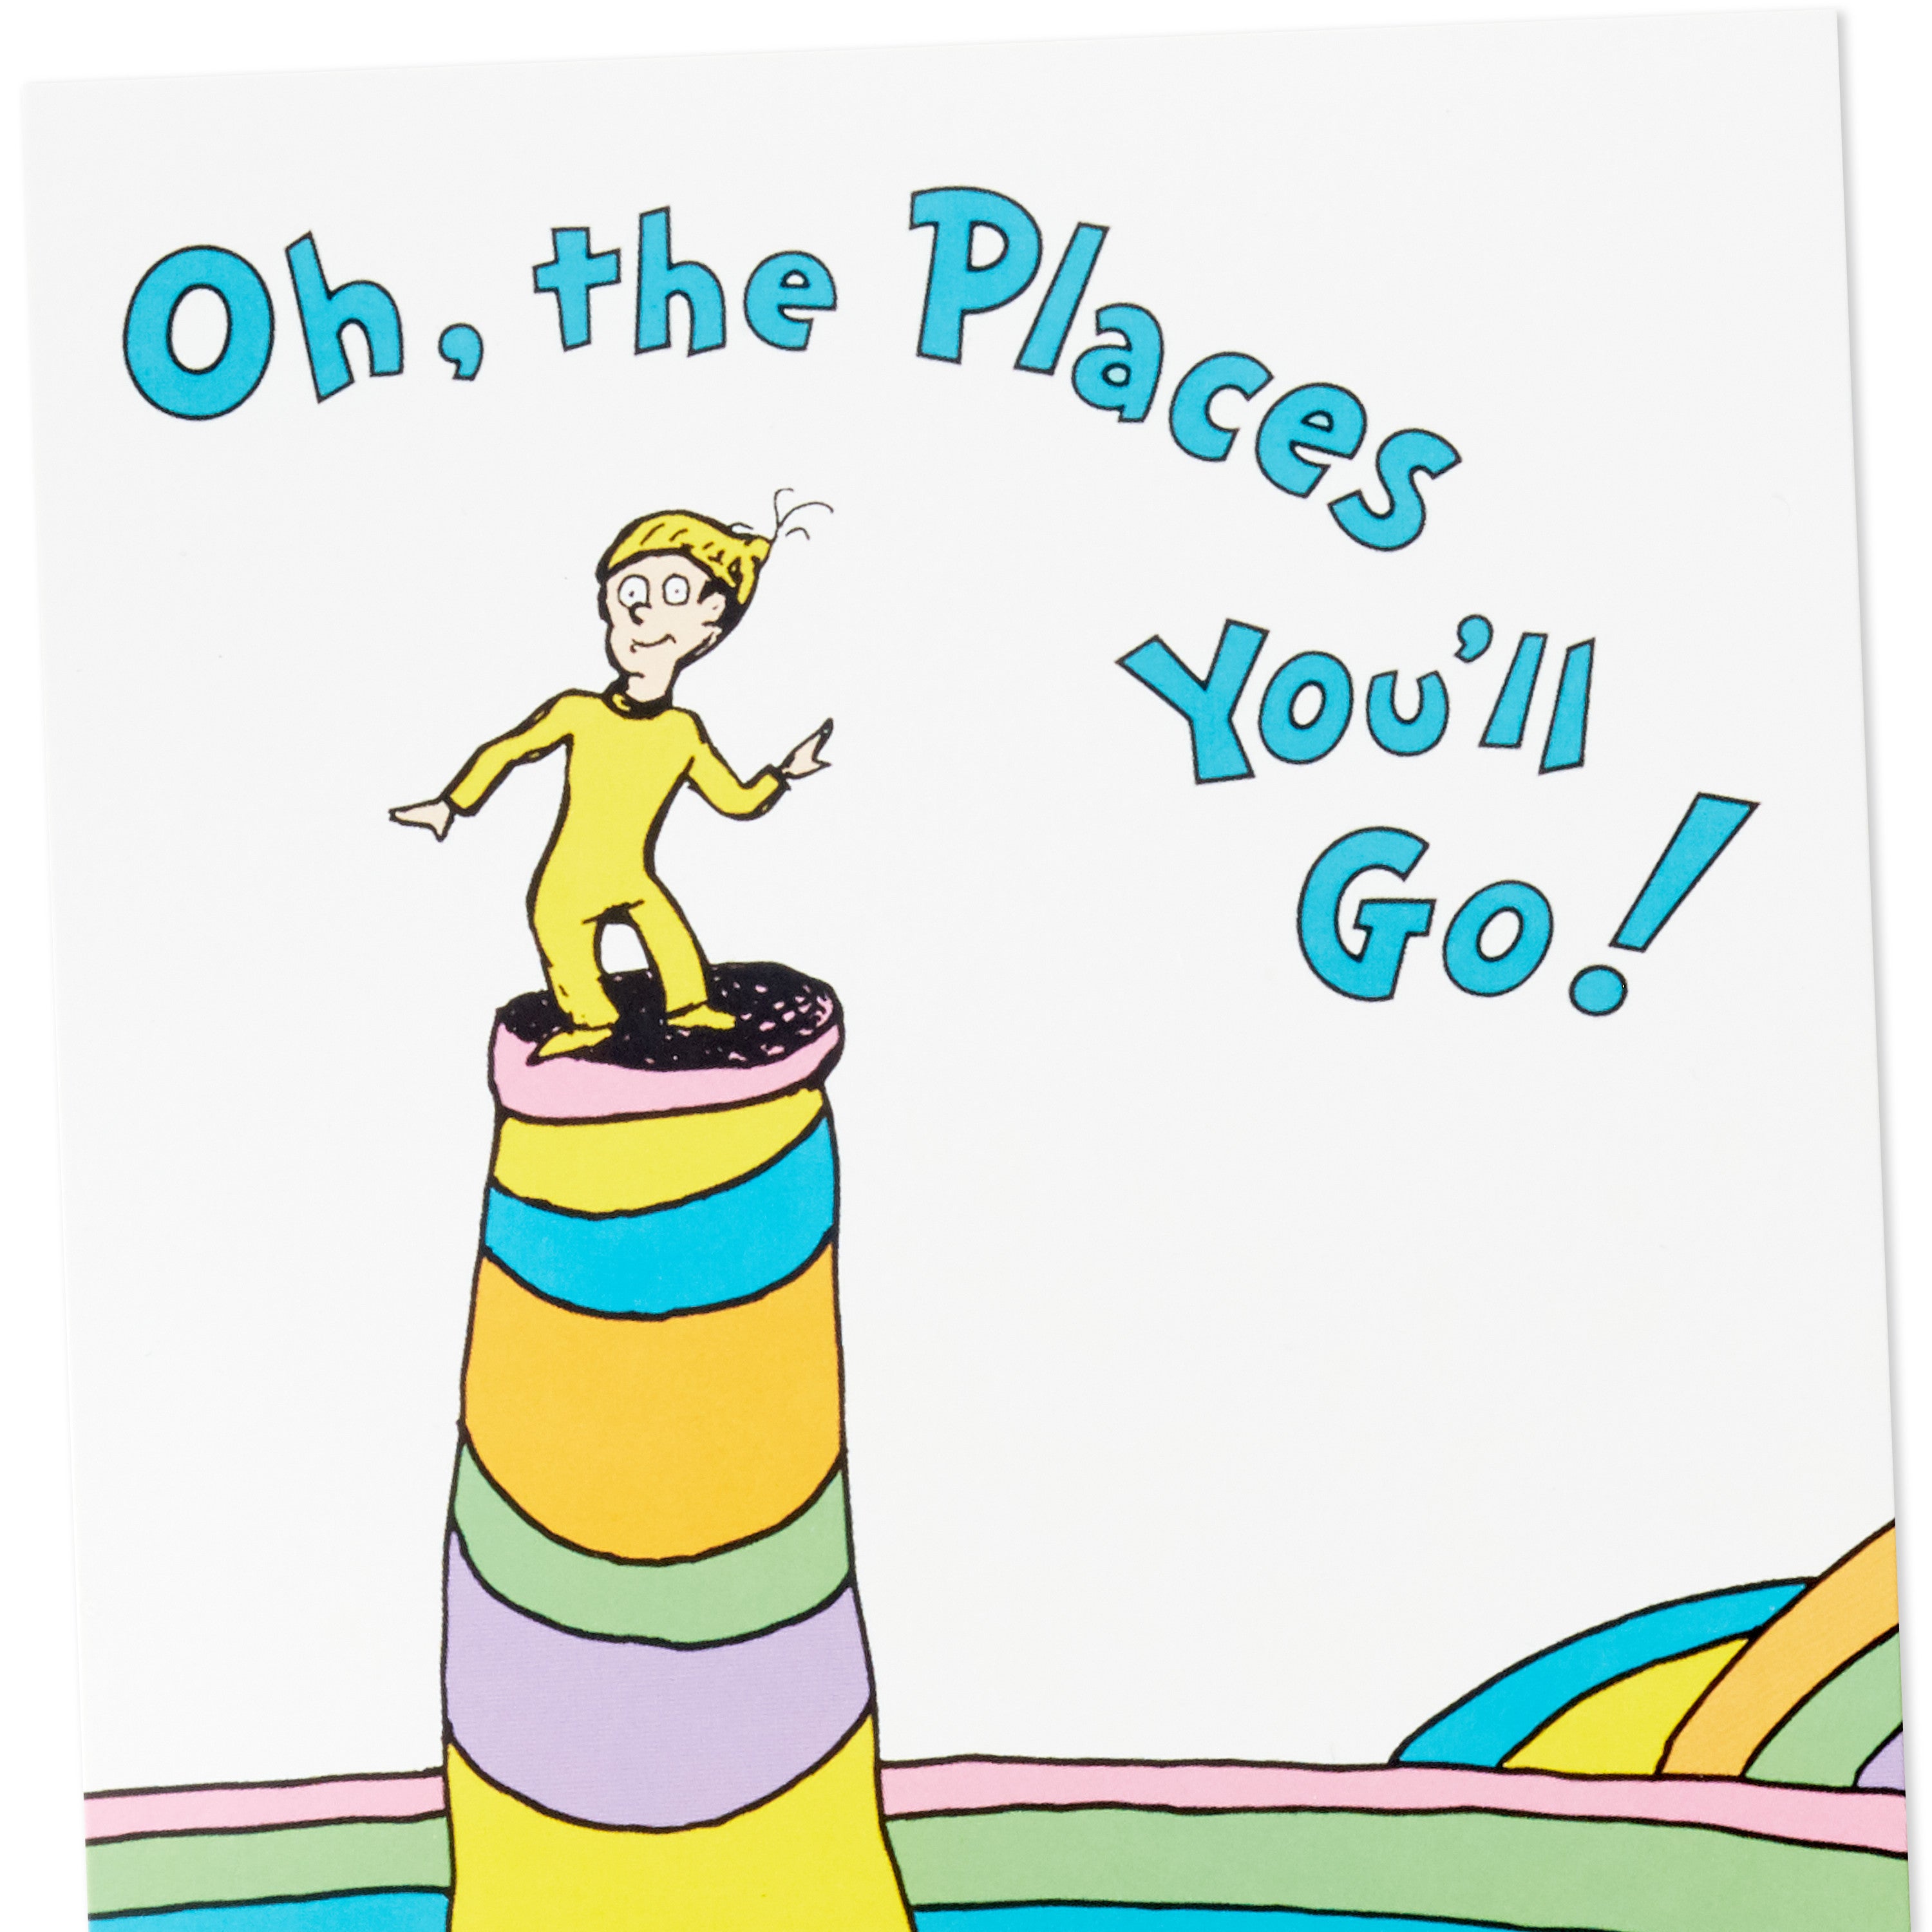 Dr. Seuss Pack of Graduation Card Money Holders or Gift Card Holders (Oh the Places You'll Go, 6 Cards with Envelopes)